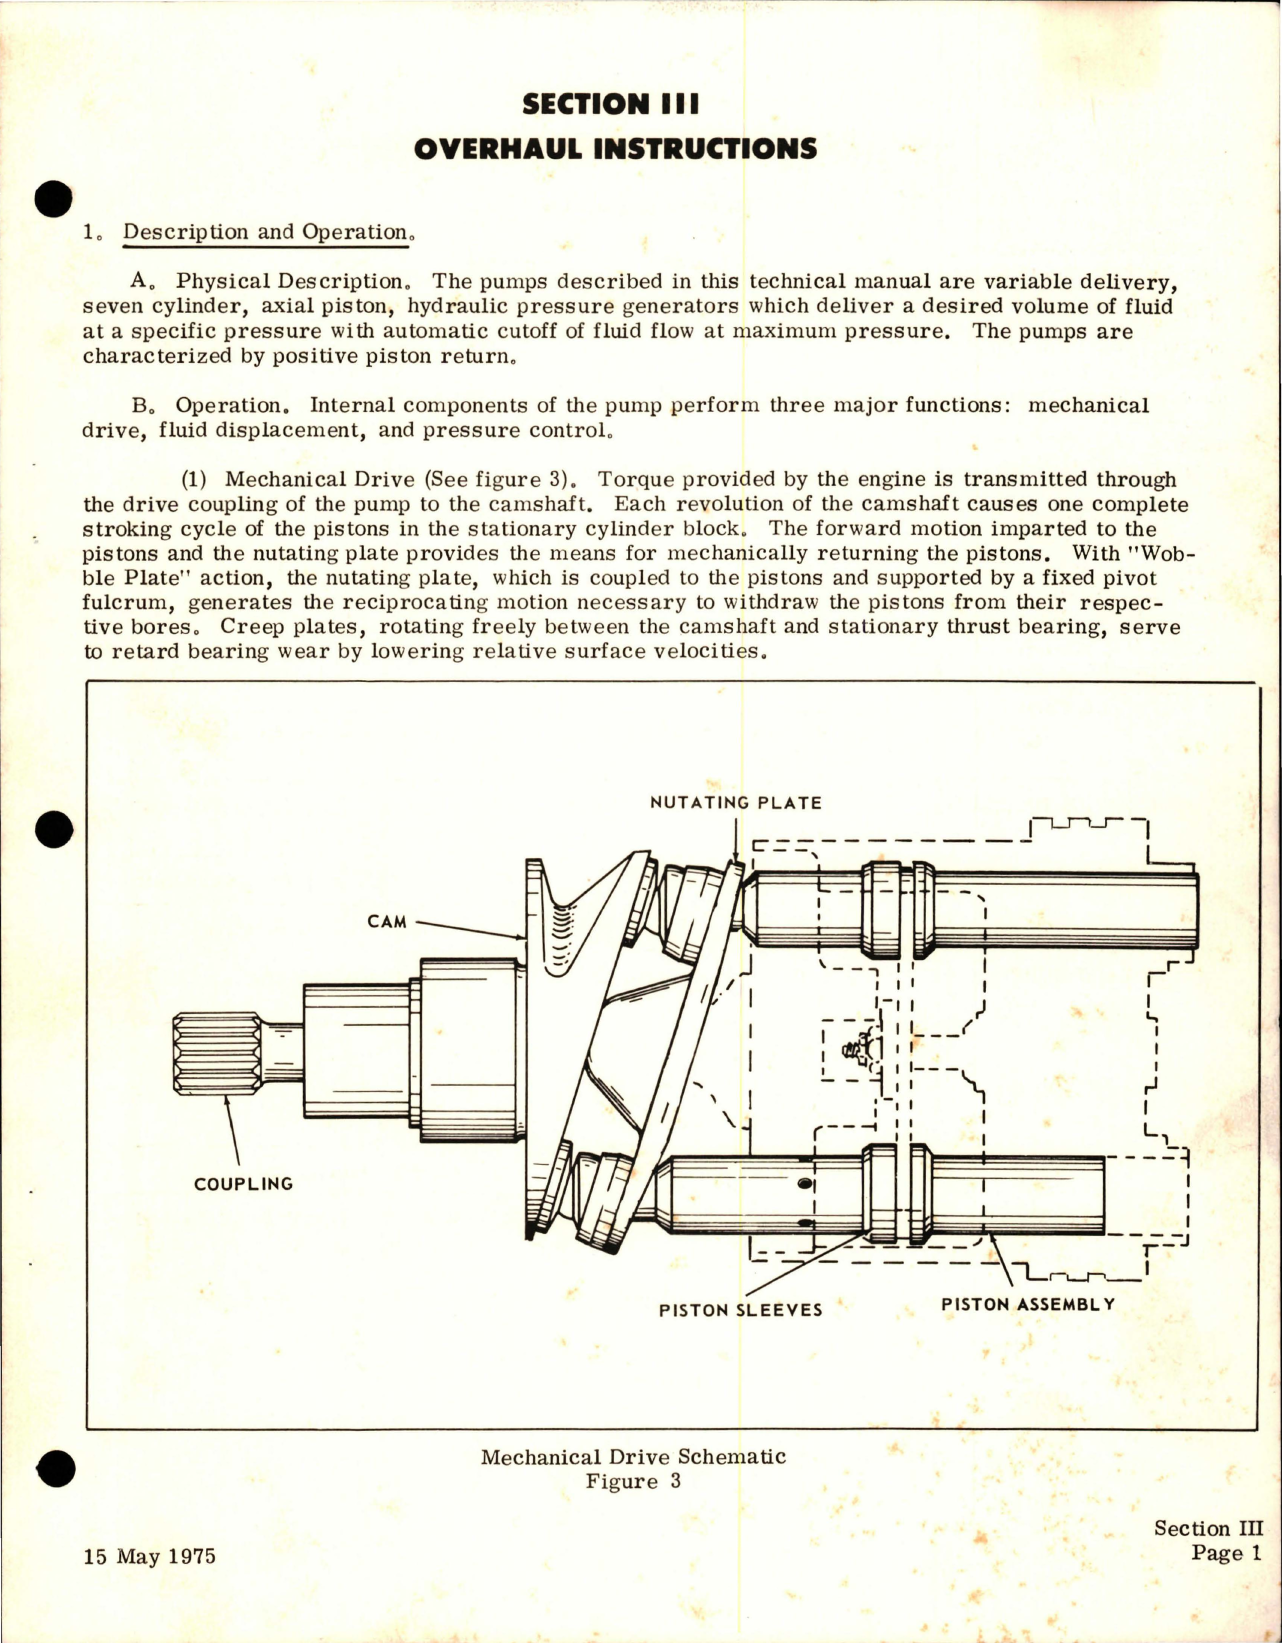 Sample page 9 from AirCorps Library document: Overhaul Instructions with Parts for Stratopower Hydraulic Pump - 65WE002 Series